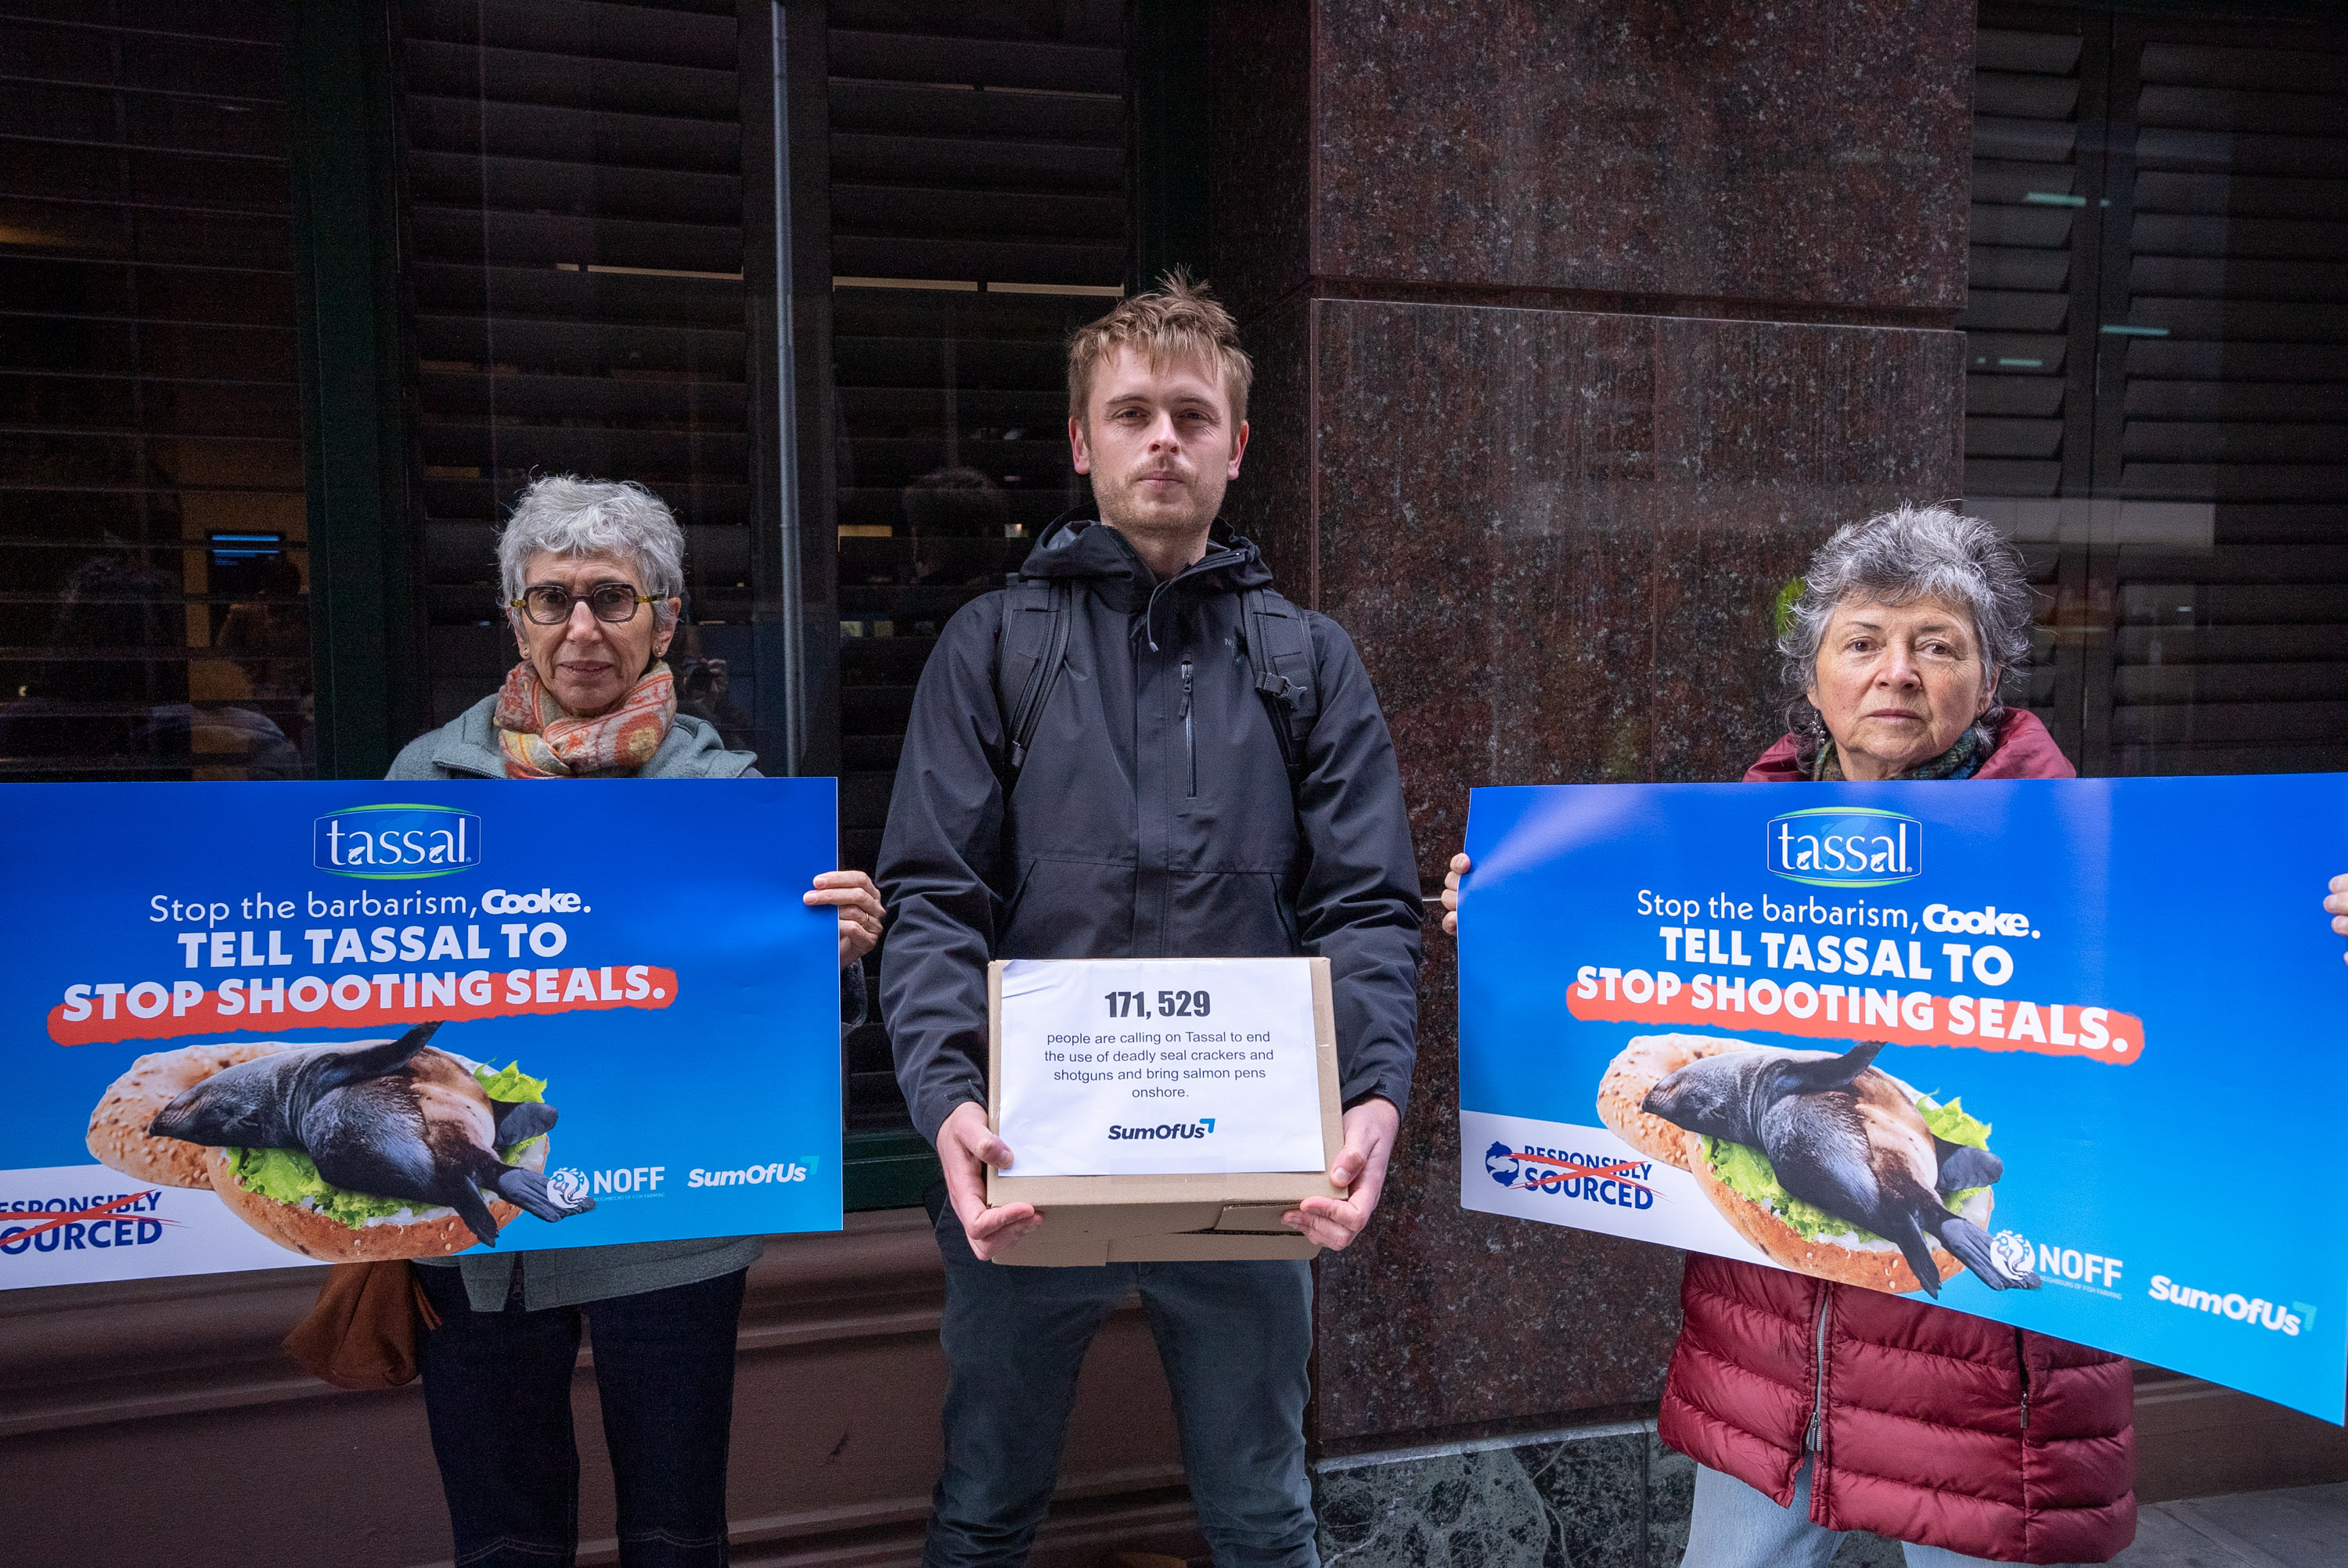 Man holds a petition box, two women hold signs.